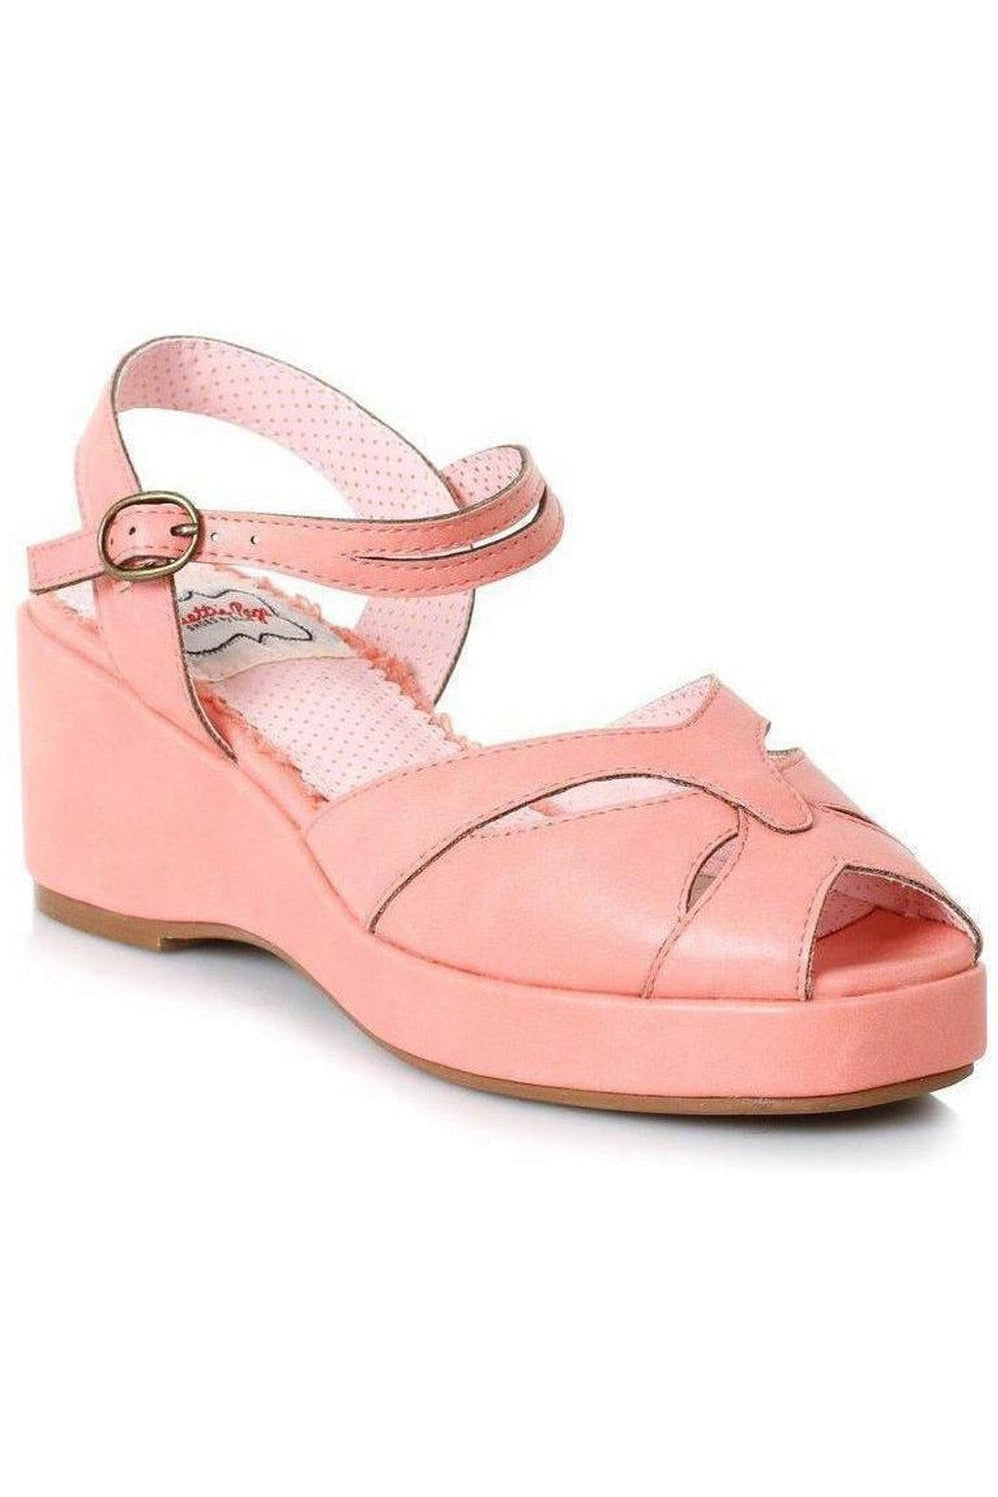 BP242-NILEY Wedge | Coral Faux Leather-Bettie Page by Ellie-SEXYSHOES.COM